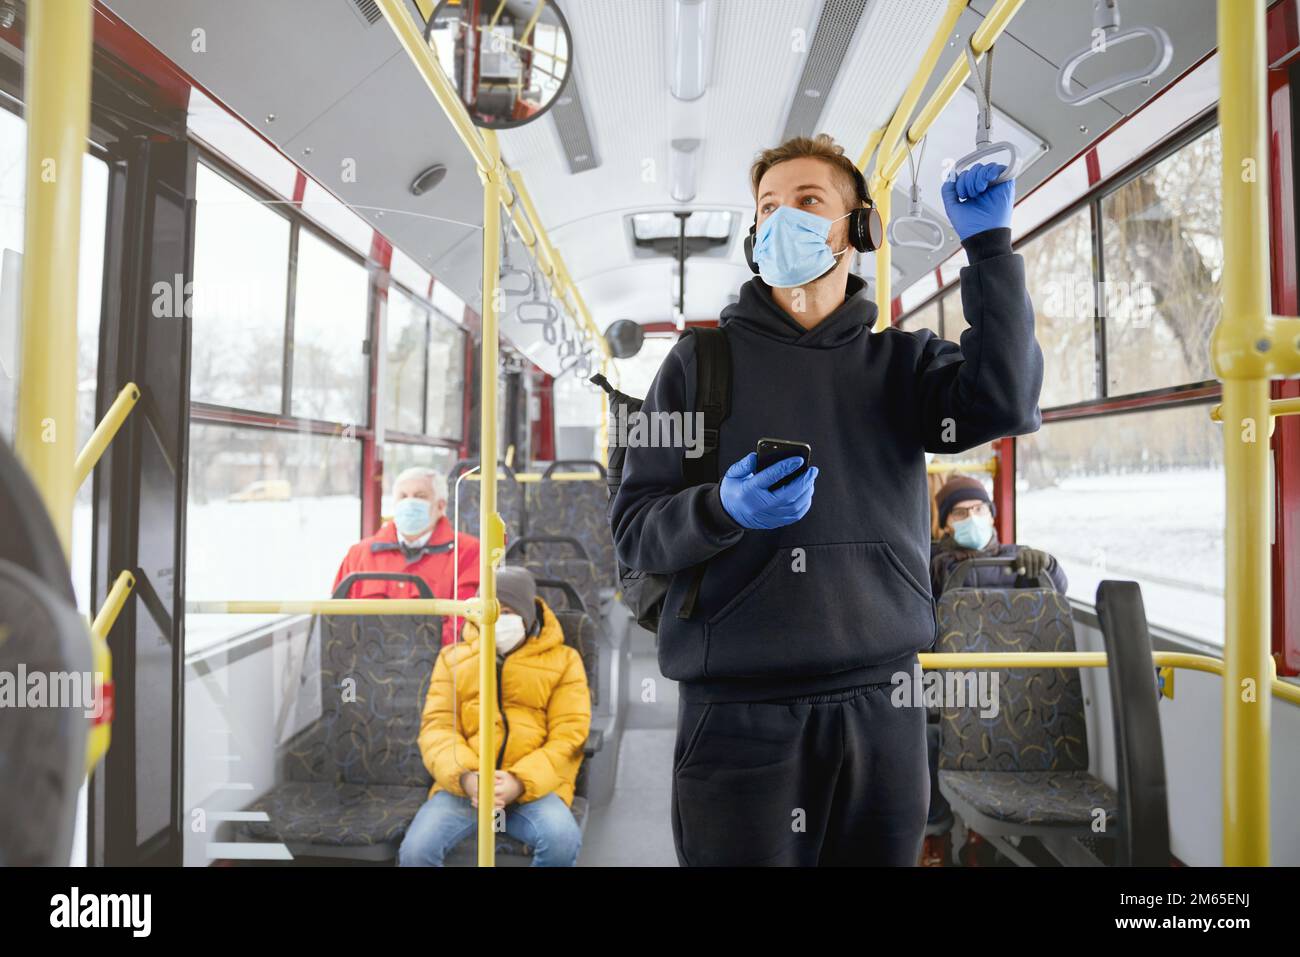 Front view of passengers going home by public transport, standing, sitting, wearing medical masks and gloves. Young man holding smartphone, paying. Co Stock Photo